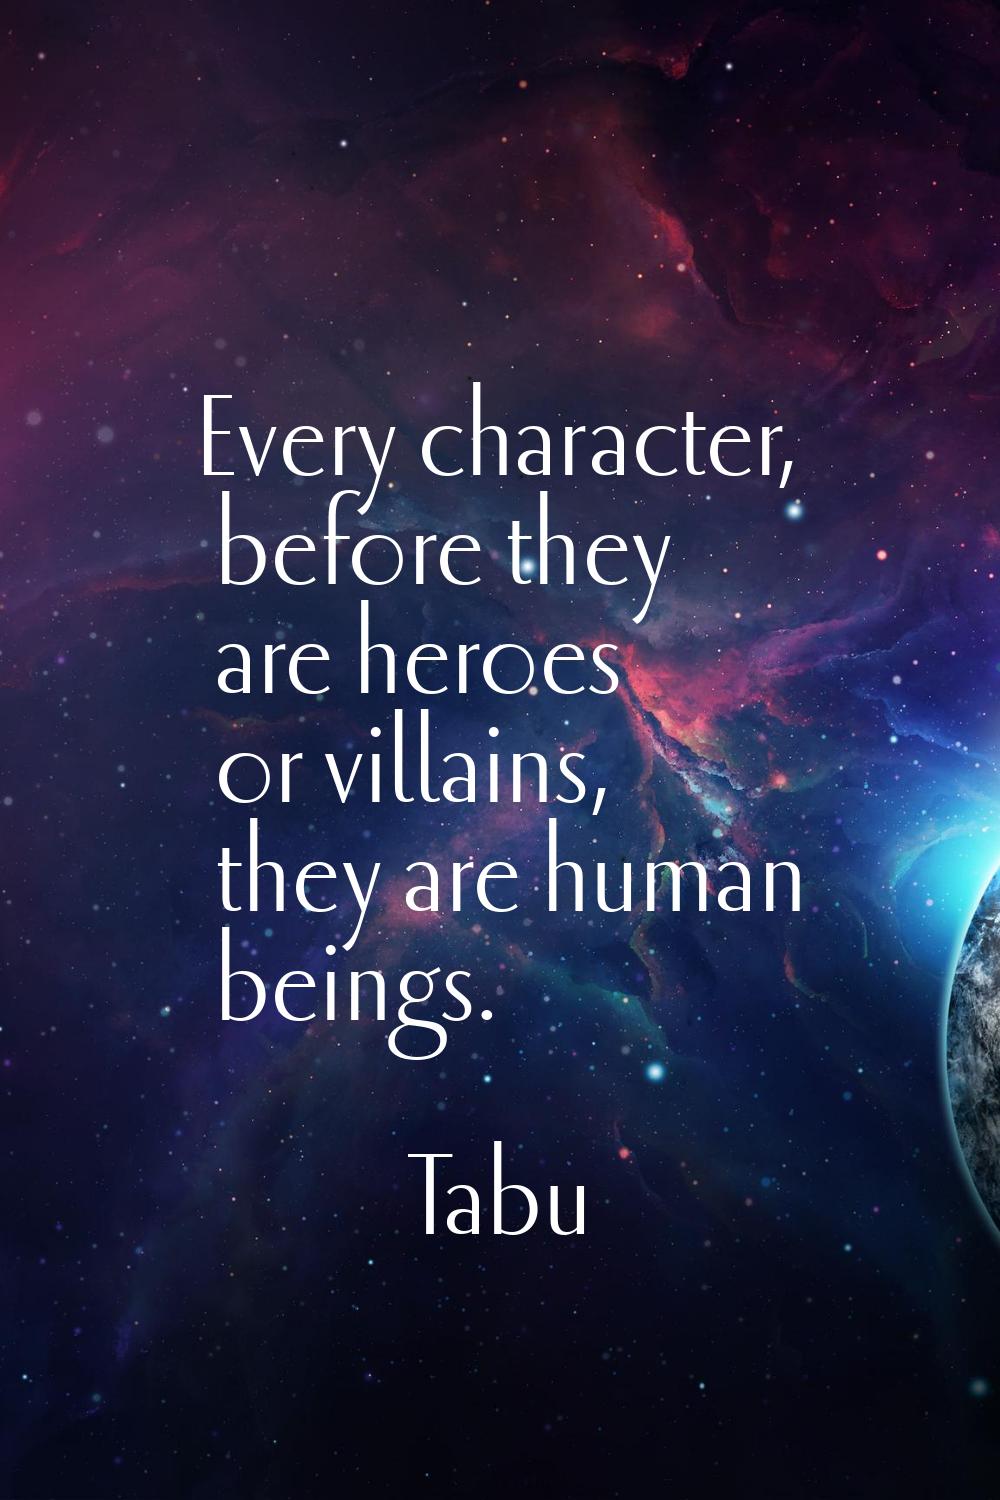 Every character, before they are heroes or villains, they are human beings.